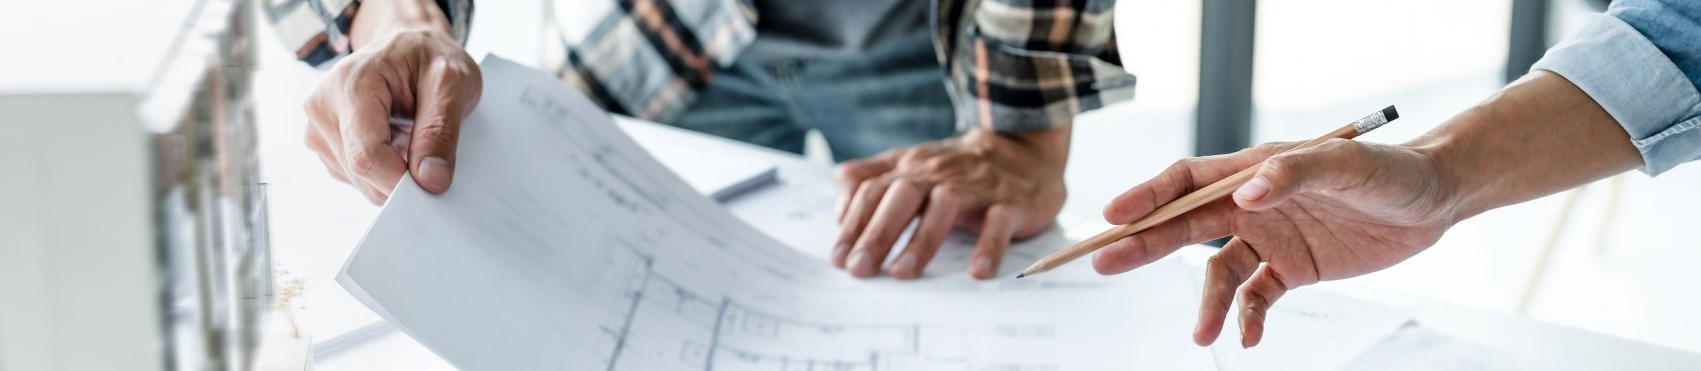 Photo of hands holding pencil while discussing a building plan.